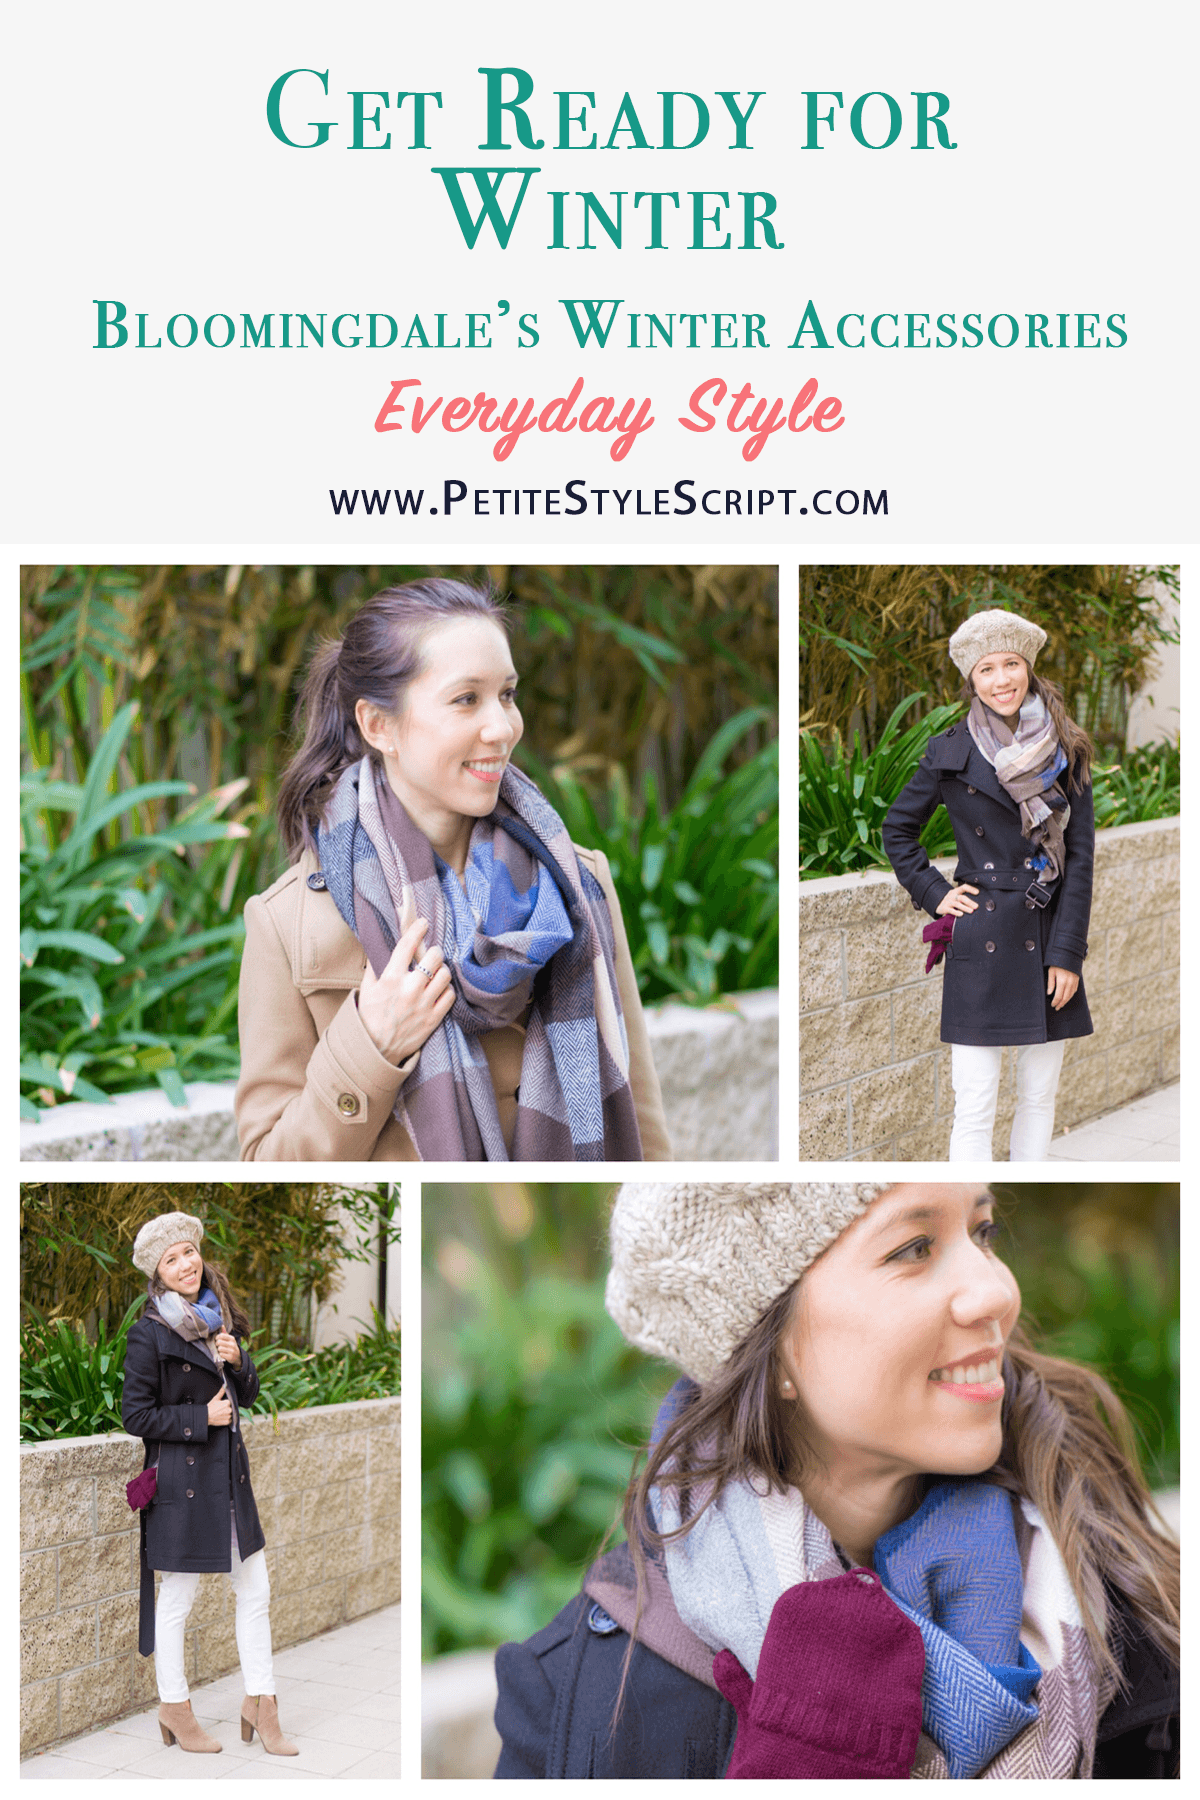 Bloomingale's Winter Accessories Review | Aqua brand | C by Bloomingdale's brand | Cashmere gloves | Colorblock blanket scarf | Tech-friendly gloves mittens | Chunky braided beret | Burberry Daylesmoore Gibbsmoore Wool Coat Review | Vince Camuto Franell Booties | Paige White Denim Jeans | Best Petite Fashion Style Blog